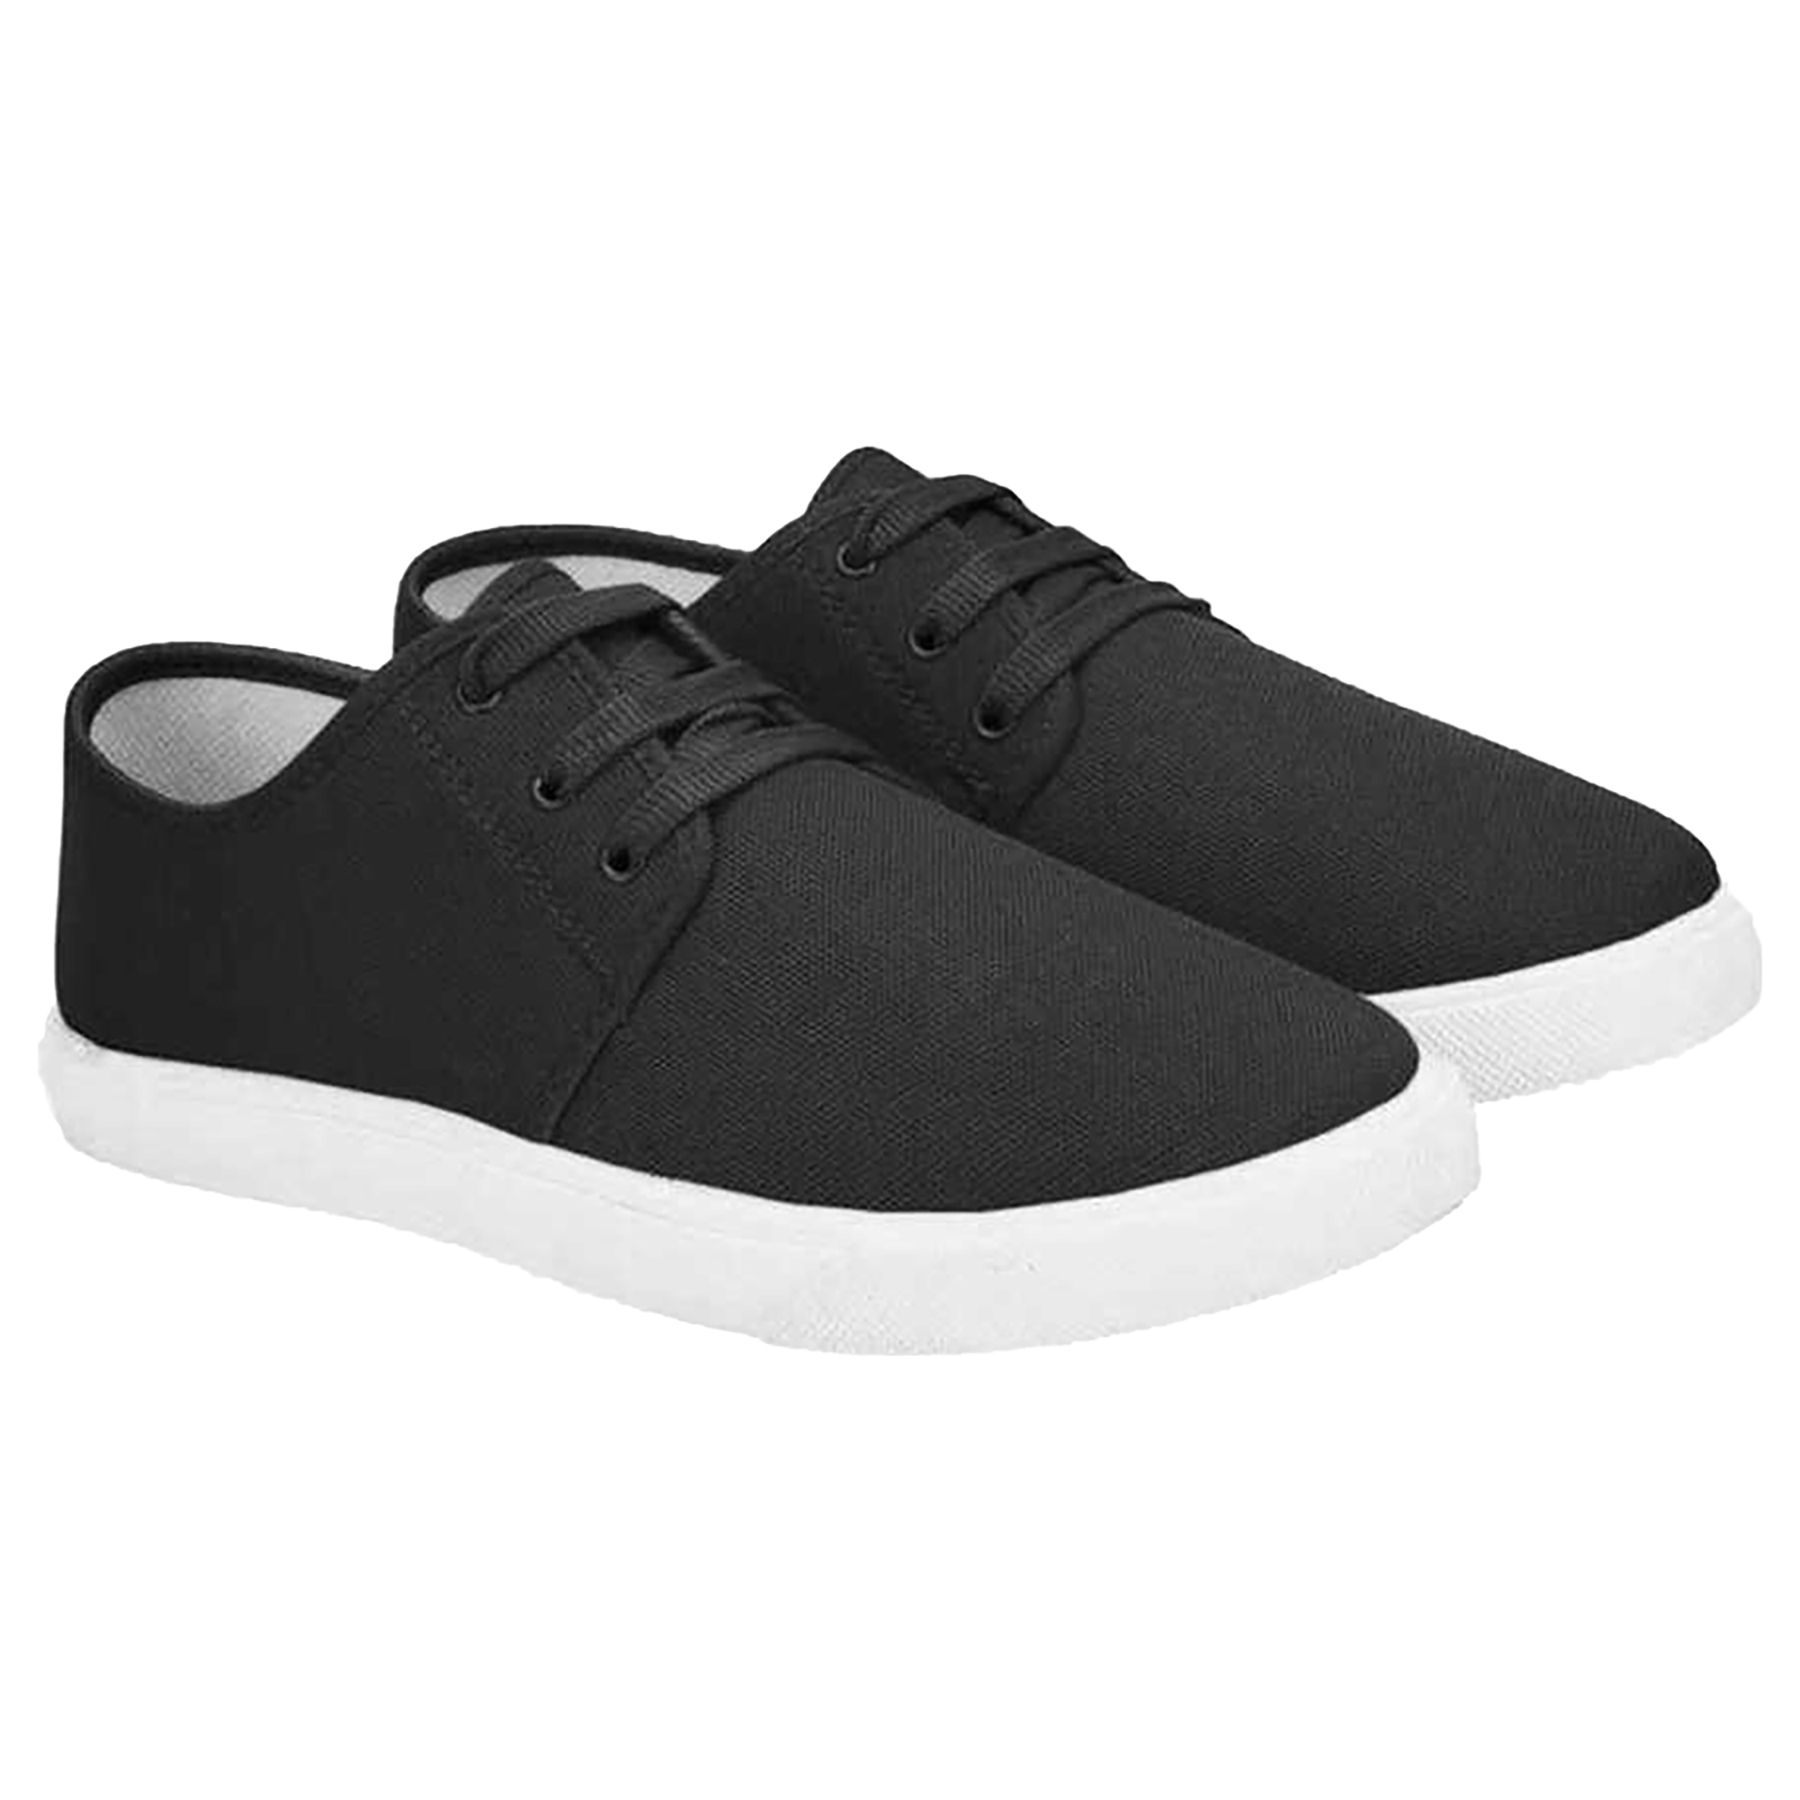     			Bruton Sneakers Casual Shoes for Men Black Men's Lifestyle